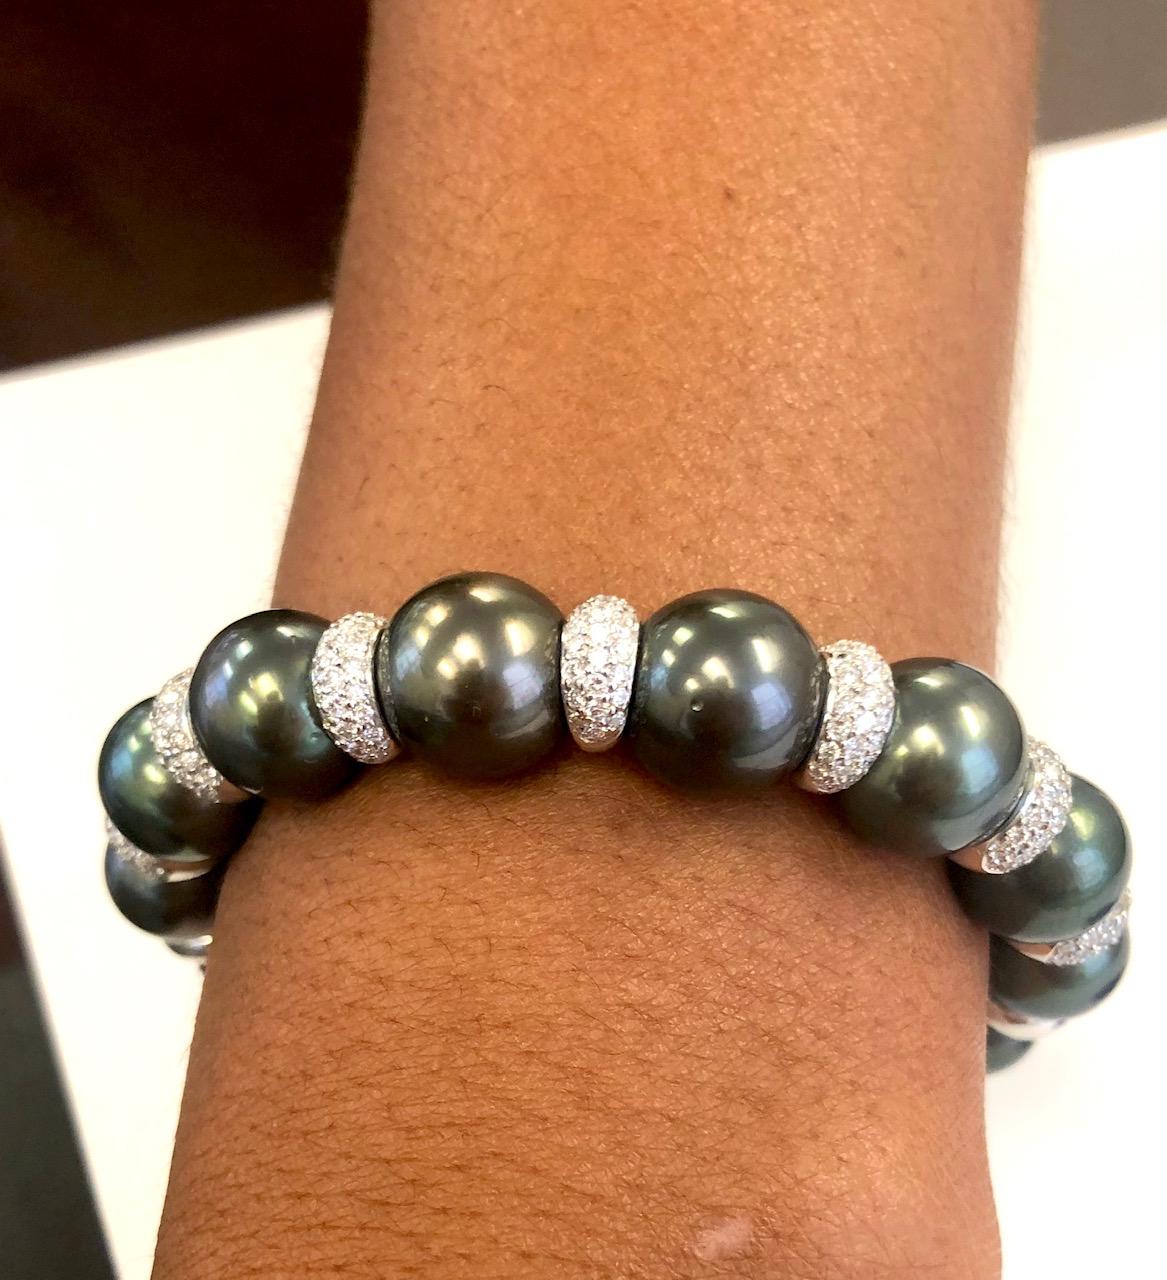 Our most popular design we produce of this style spring-on Bangle Bracelet, made in 18 Kt White Gold, set with 196 Diamonds  and Tahitian Black Pearls 12.7 to 11.0 mm. Also available with South Sea Pearls ad natural color Golden Pearls.
Many of our